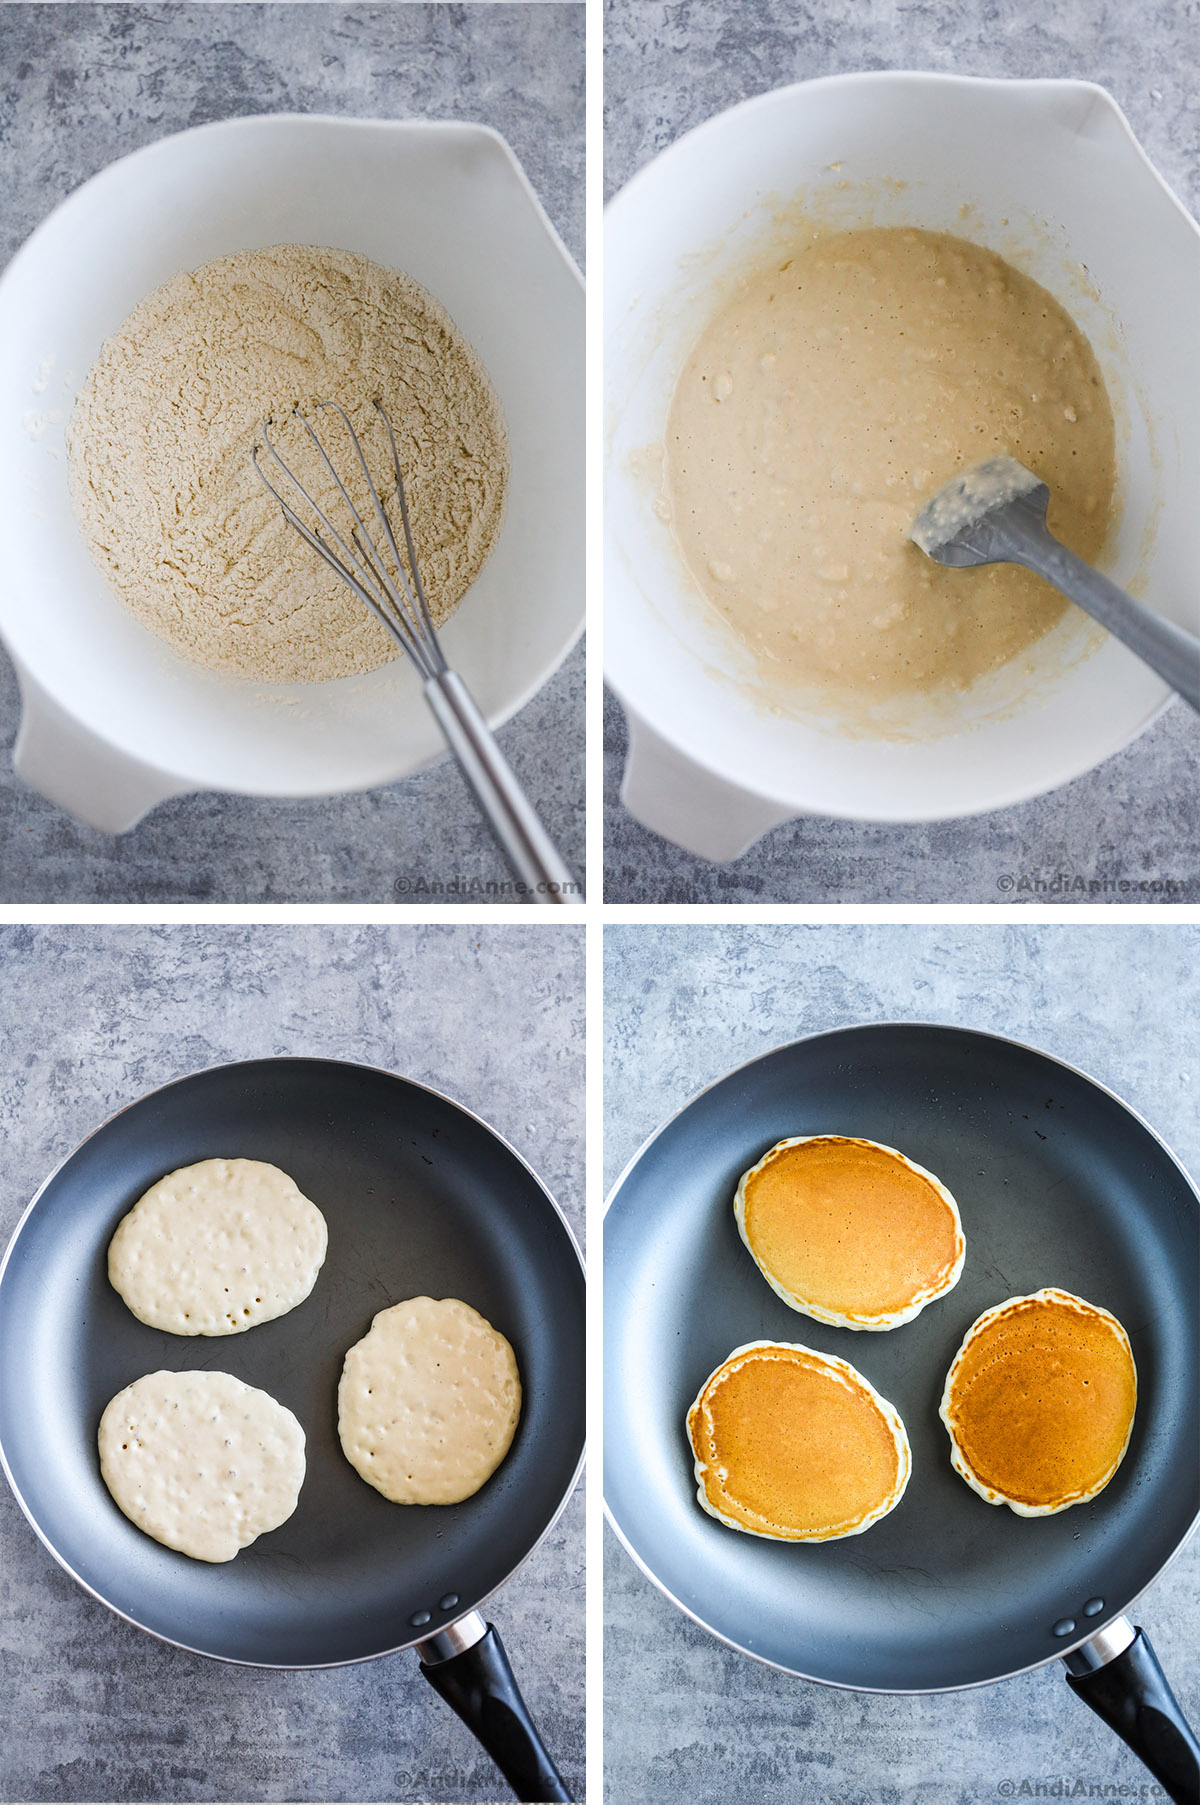 Four images grouped together. First is a white bowl with flour and a whisk. Second is a bowl with pancake batter and a spatula. Third is three uncooked pancakes in a frying pan. Fourth is golden brown pancakes in a frying pan. 